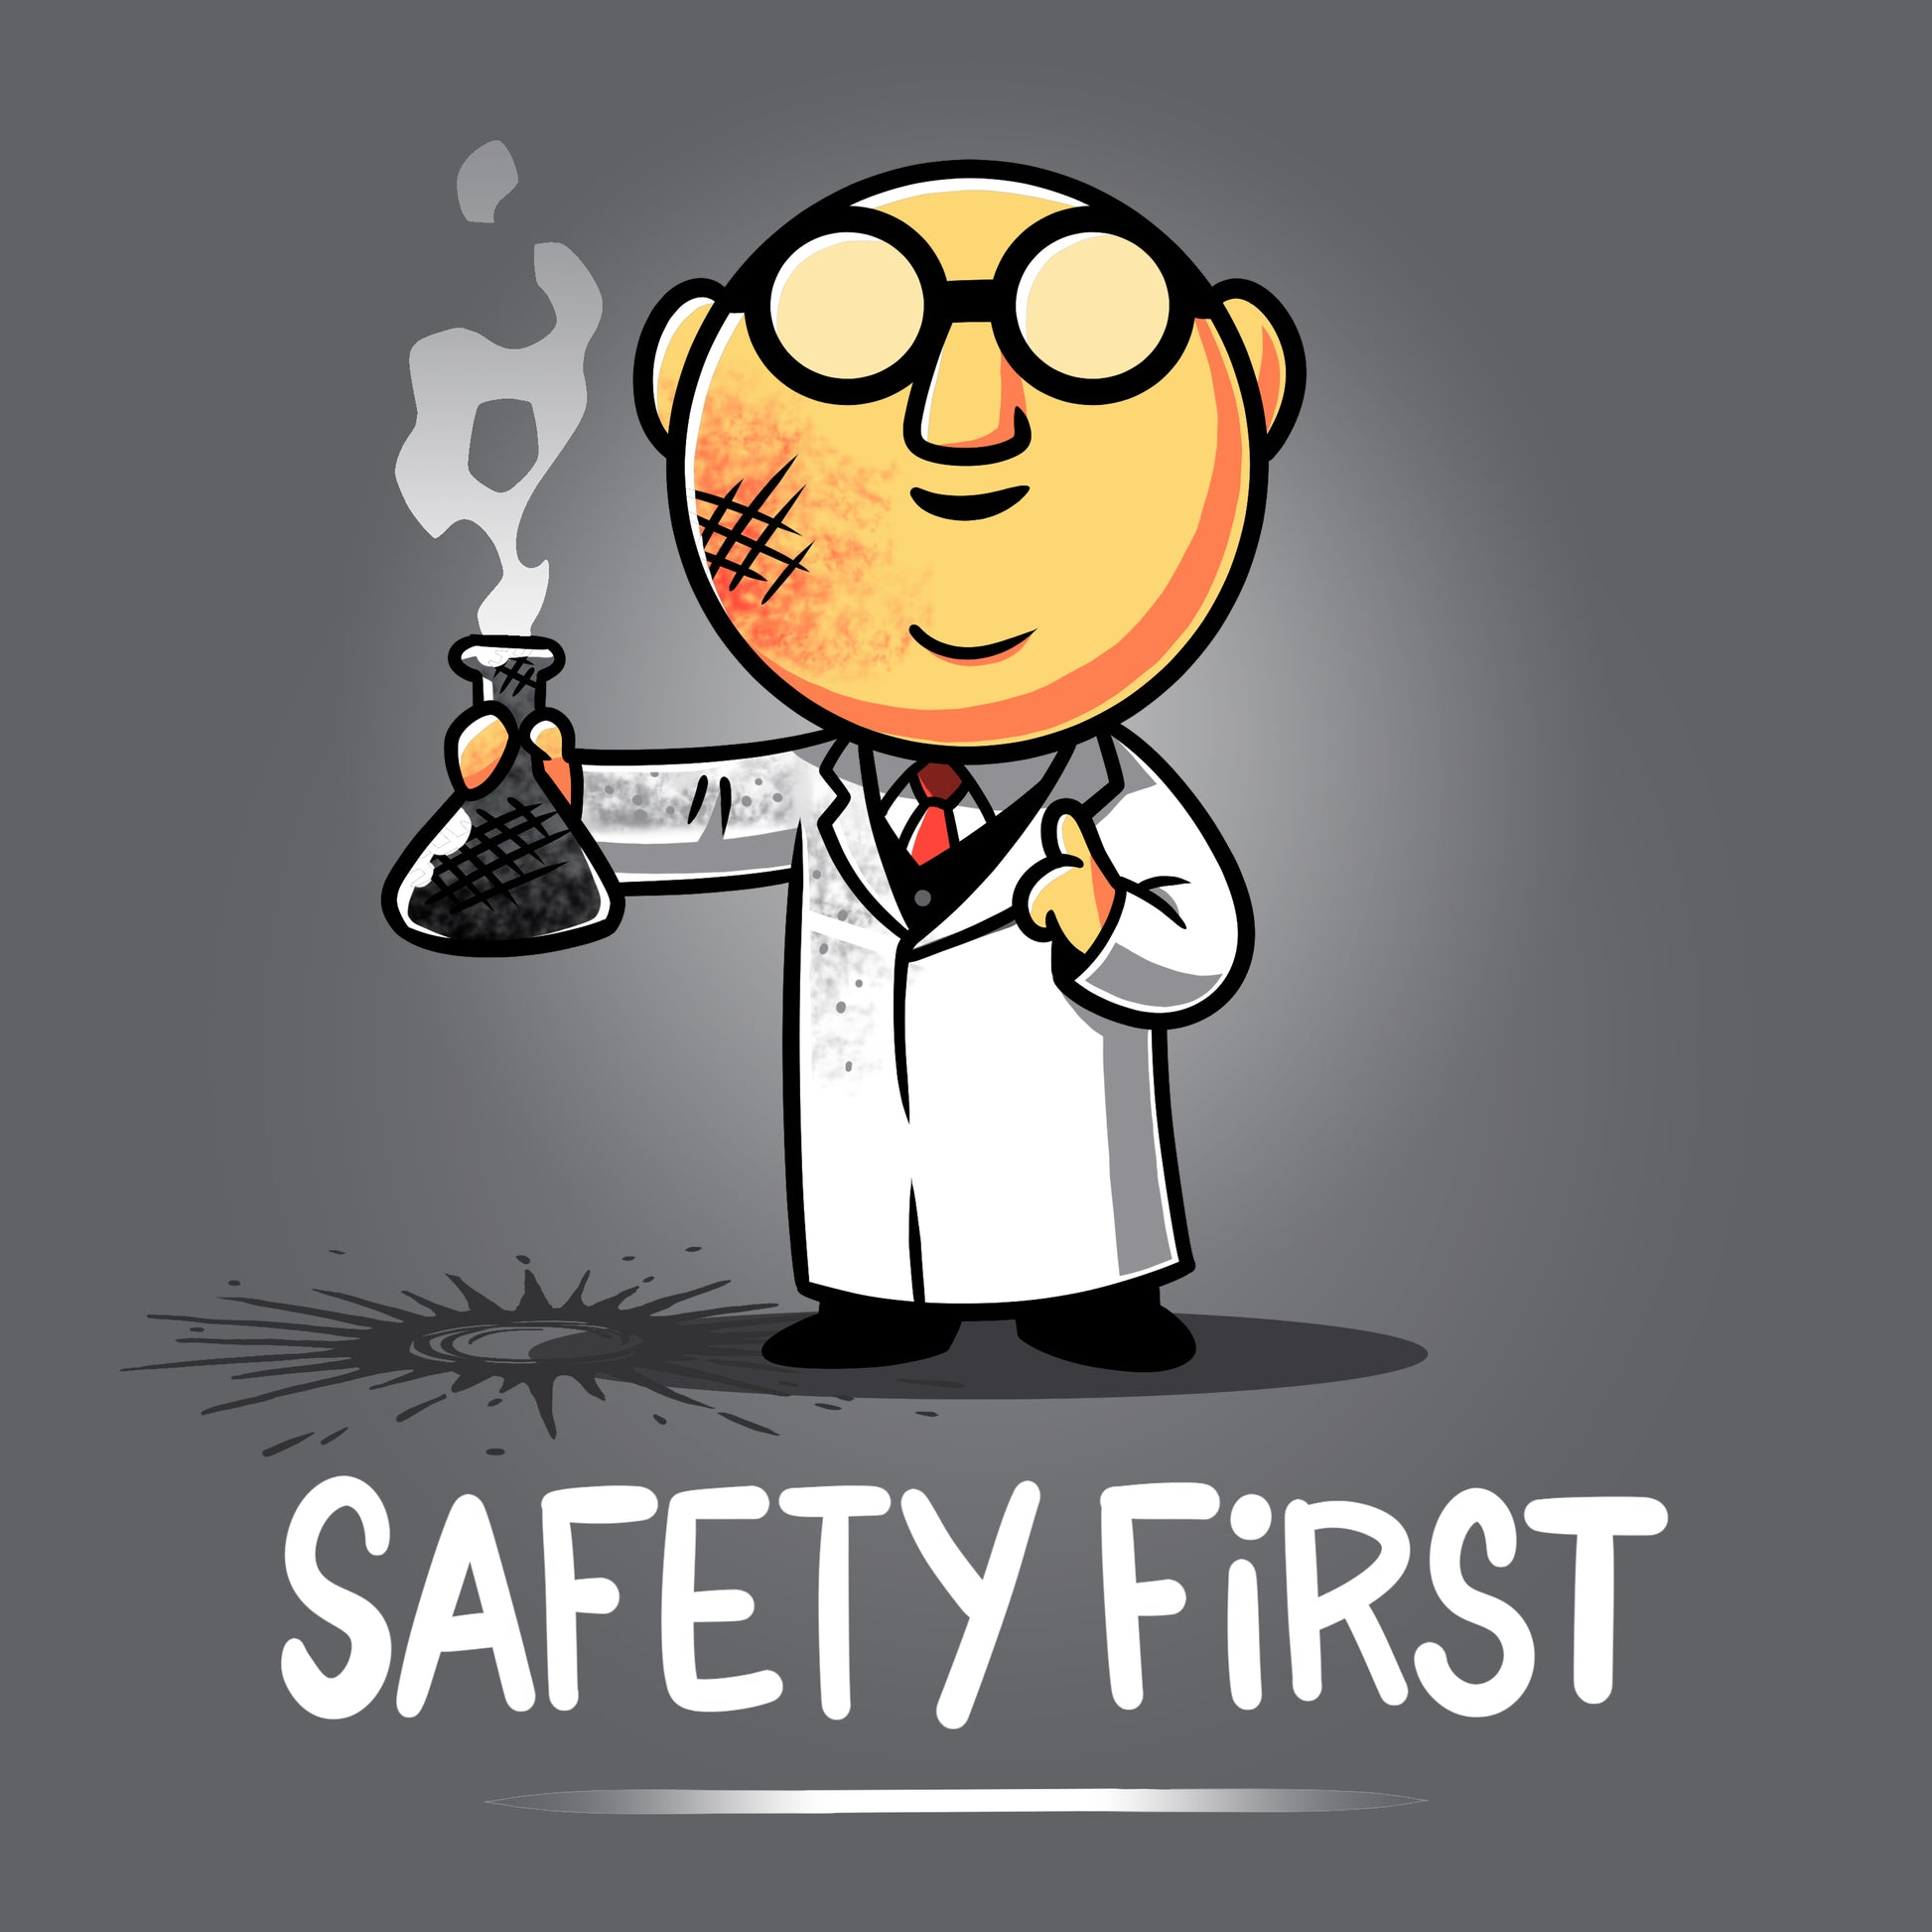 An officially licensed Disney cartoon character, Dr. Bunsen Honeydew: Safety First, holding a flask with the words "safety first" printed on it.